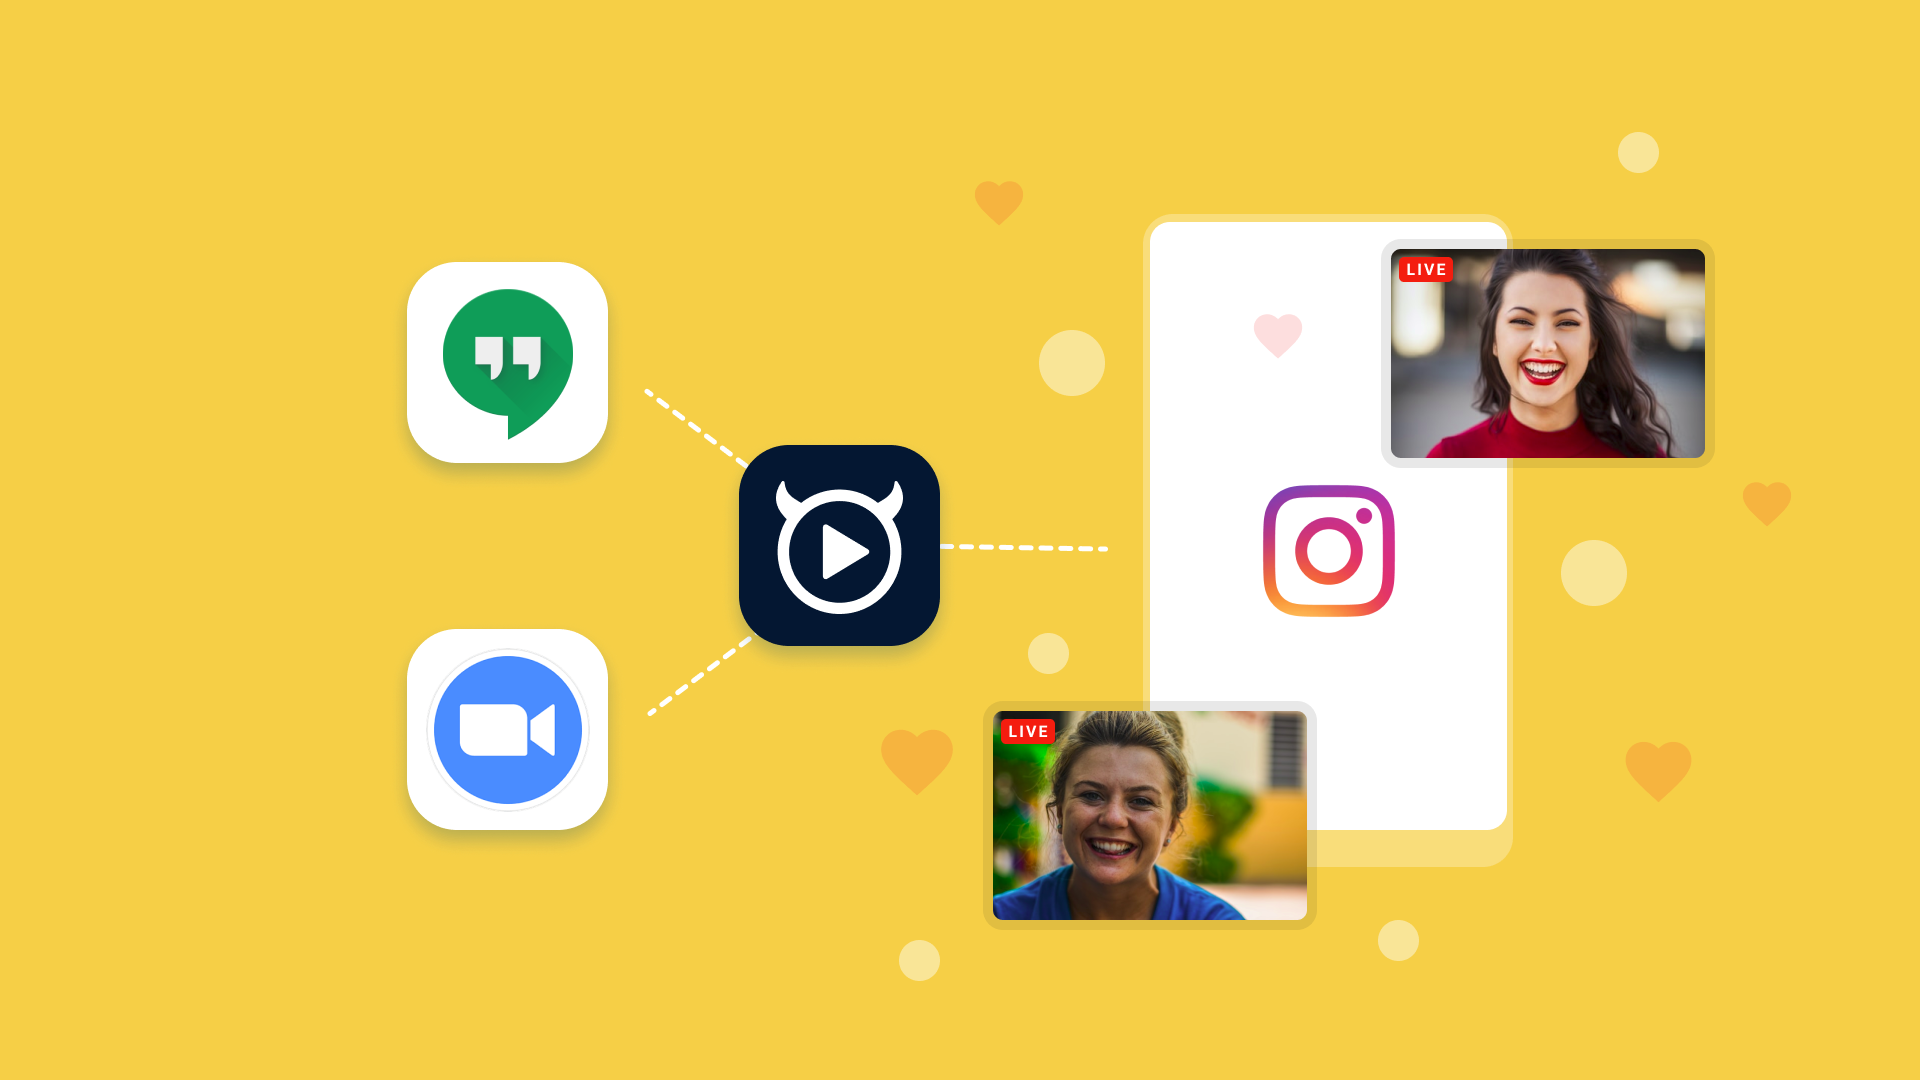 Learn how to stream your zoom calls, Goole meet calls or Whereby calls into Instagram live from your PC using OBS Studio and Streamon.